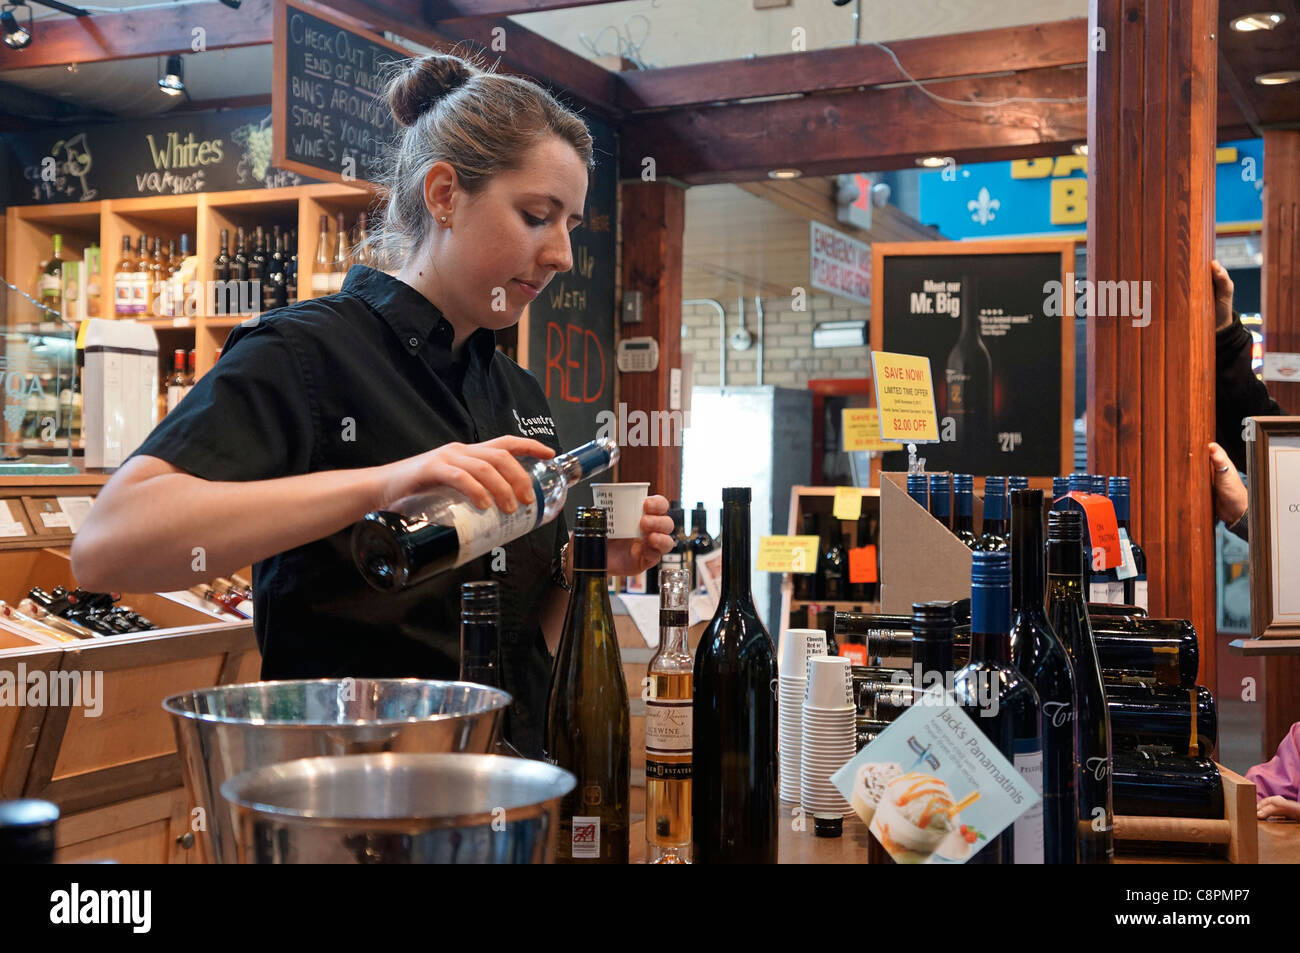 Young woman pouring wine sample for tasting Stock Photo